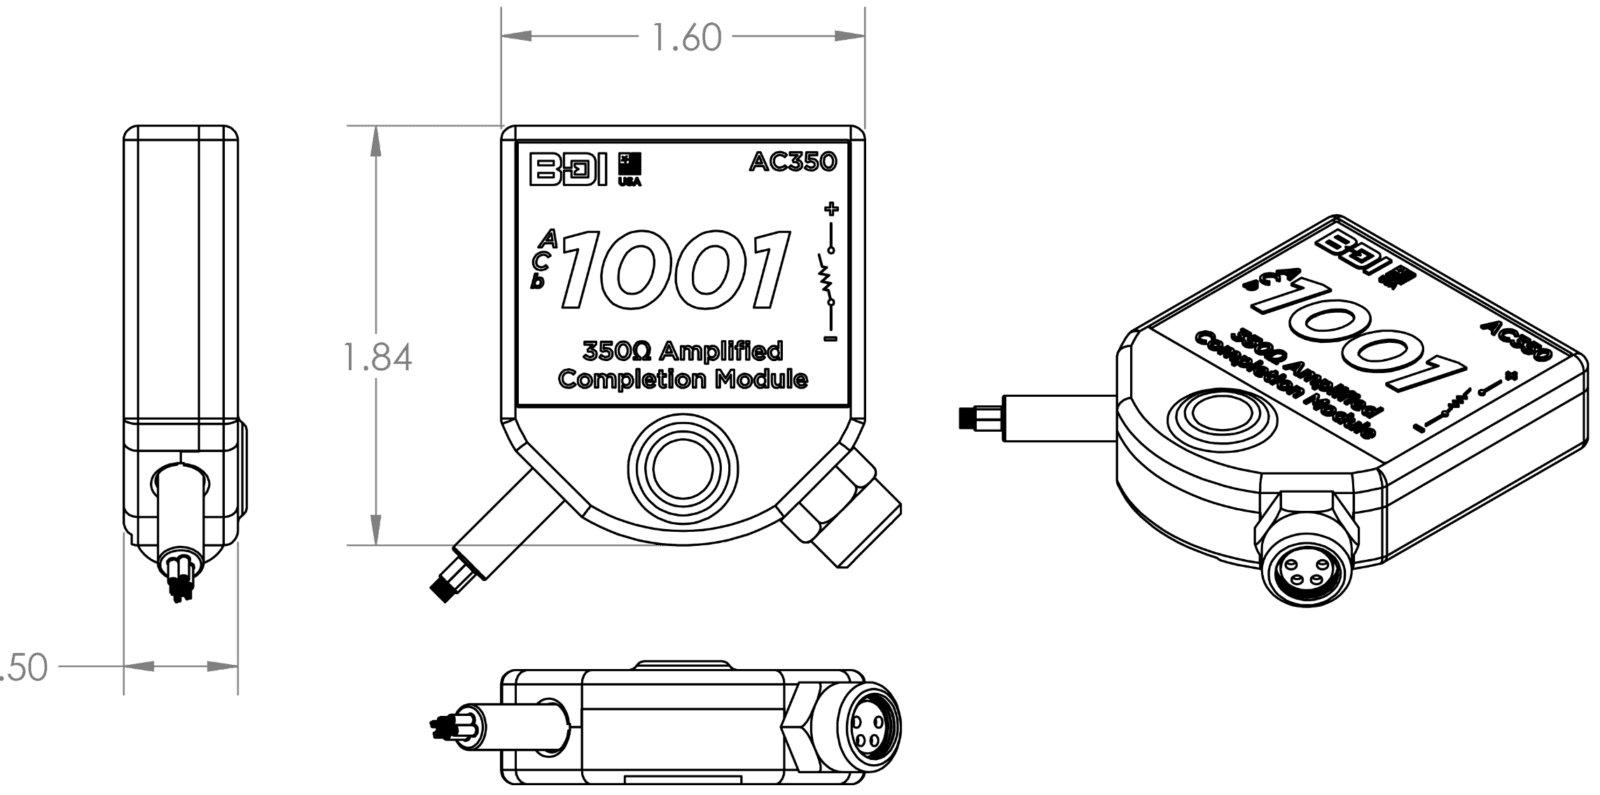 BDI AC350 Amplified Completion Module Technical Drawing in Inches